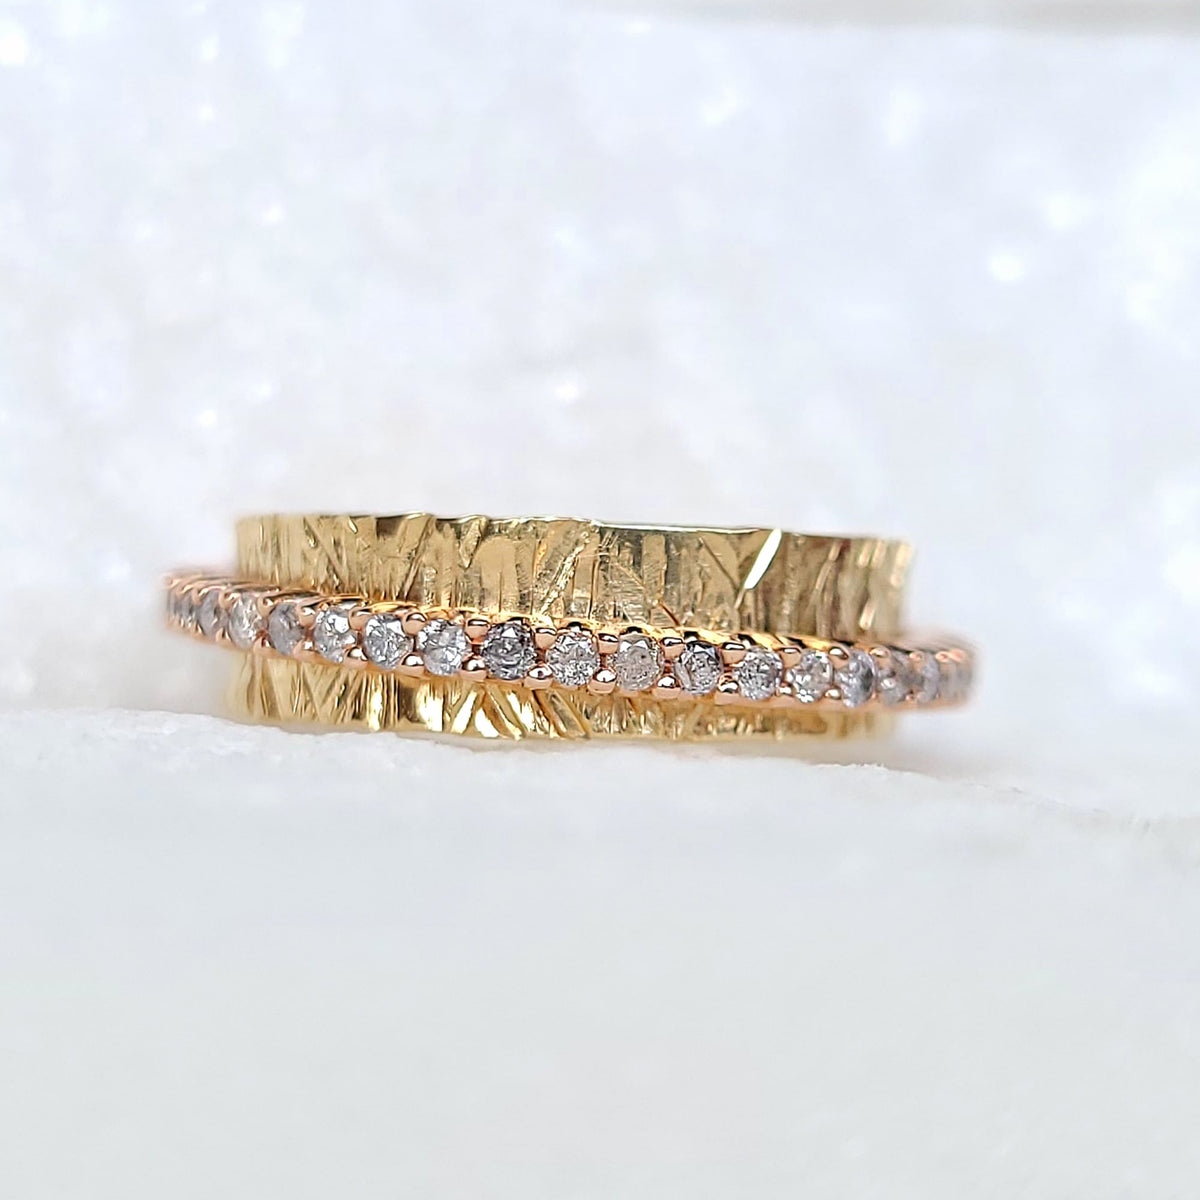 Sincerely Ginger Jewelry 14K Salt and Pepper Diamond Pinky Spinner Ring in Yellow and Rose Gold